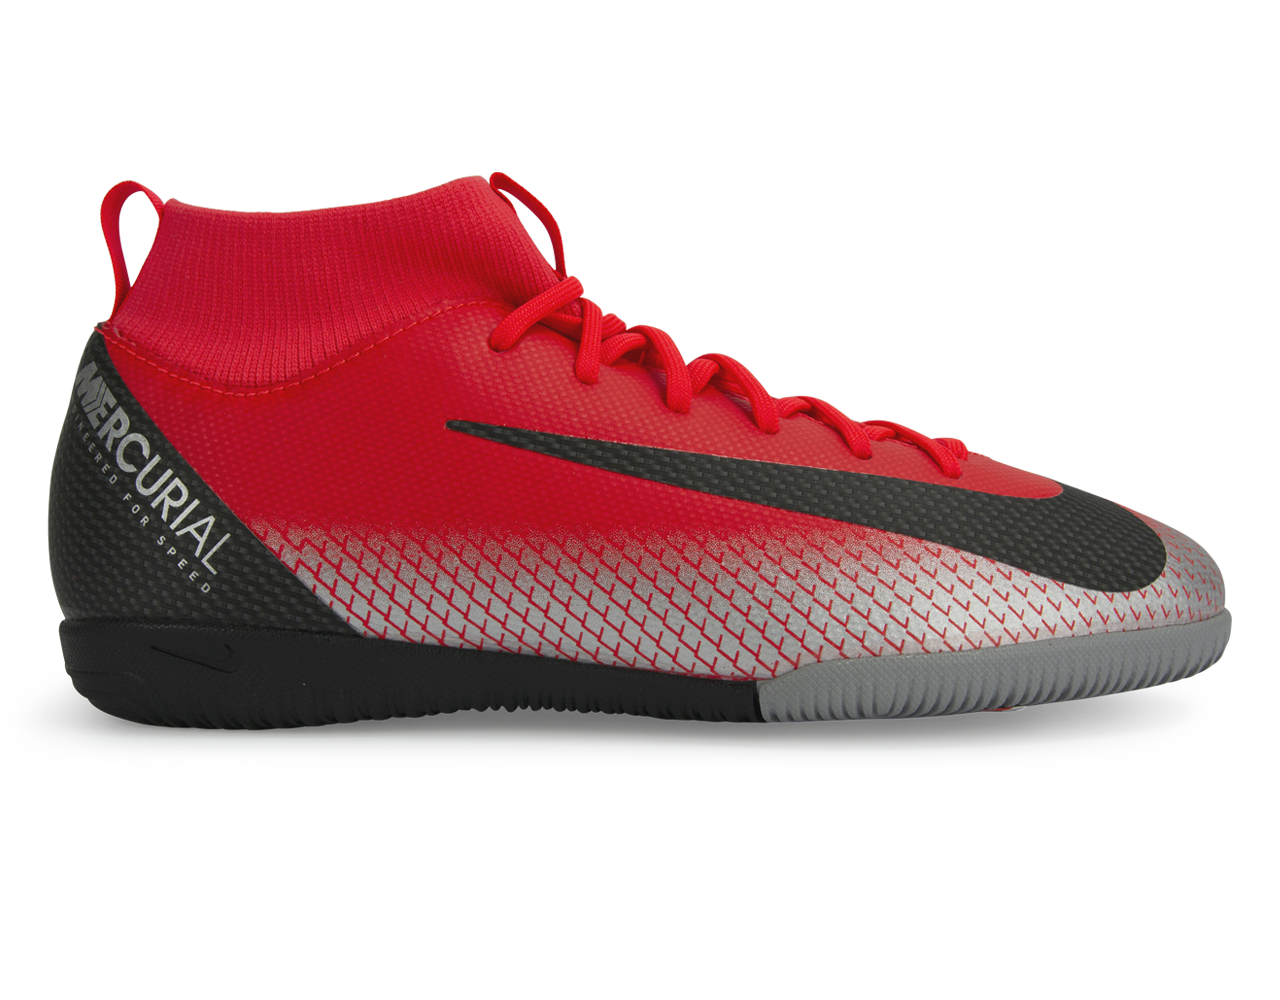 Nike Kids Mercurial CR7 Superfly 6 Academy GS Indoor Soccer Shoes Bright Crimson/Black